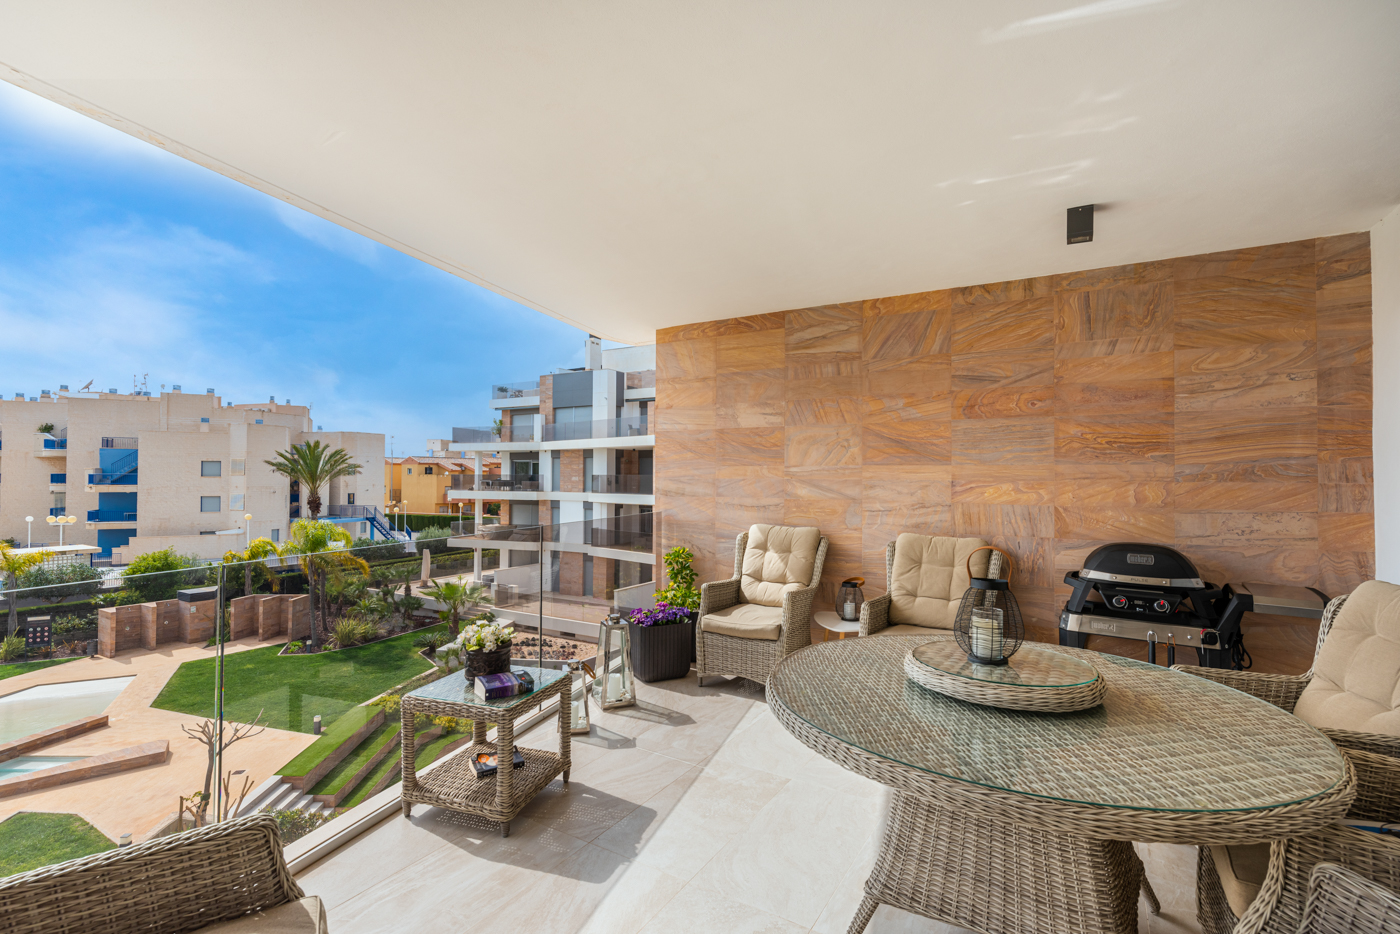 3 bedroom apartment / flat for sale in Cabo Roig, Costa Blanca